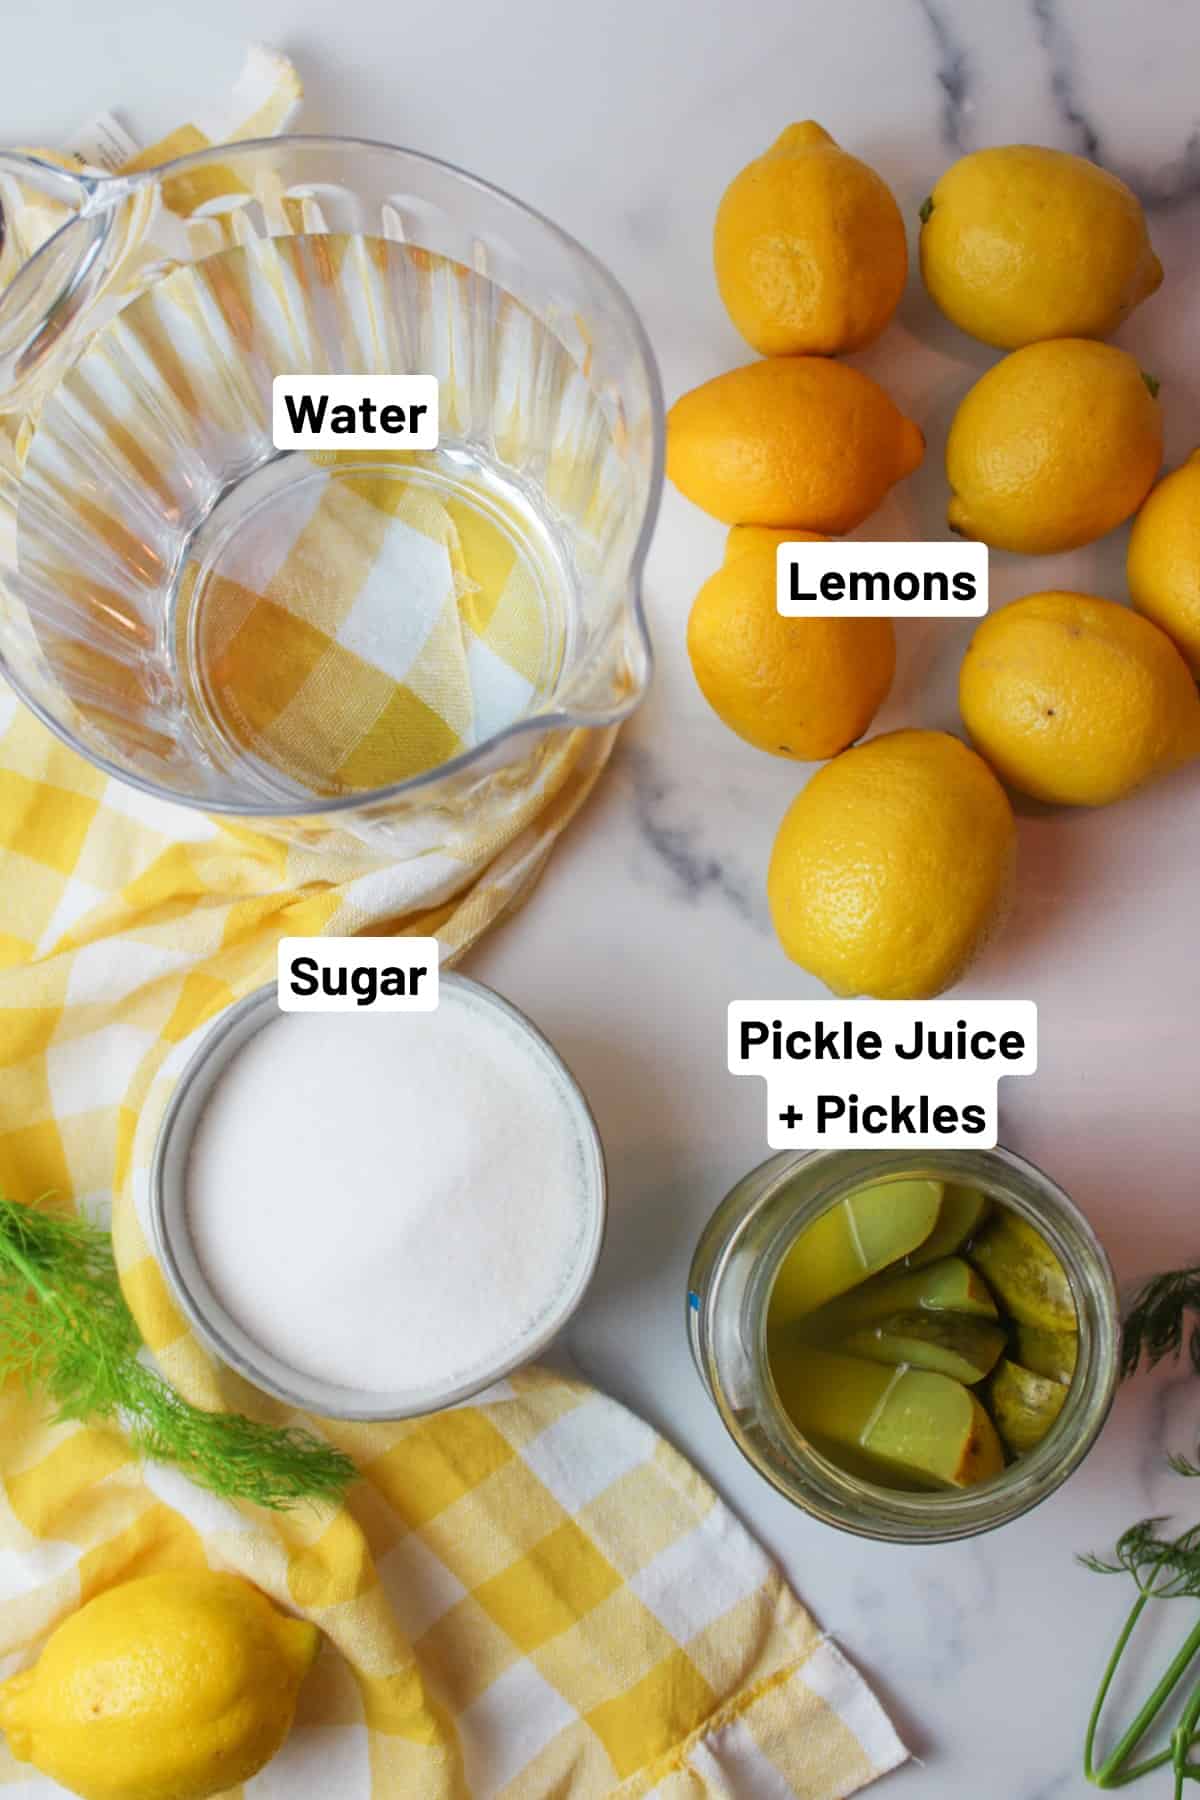 labeled ingredients needed to make dill pickle lemonade